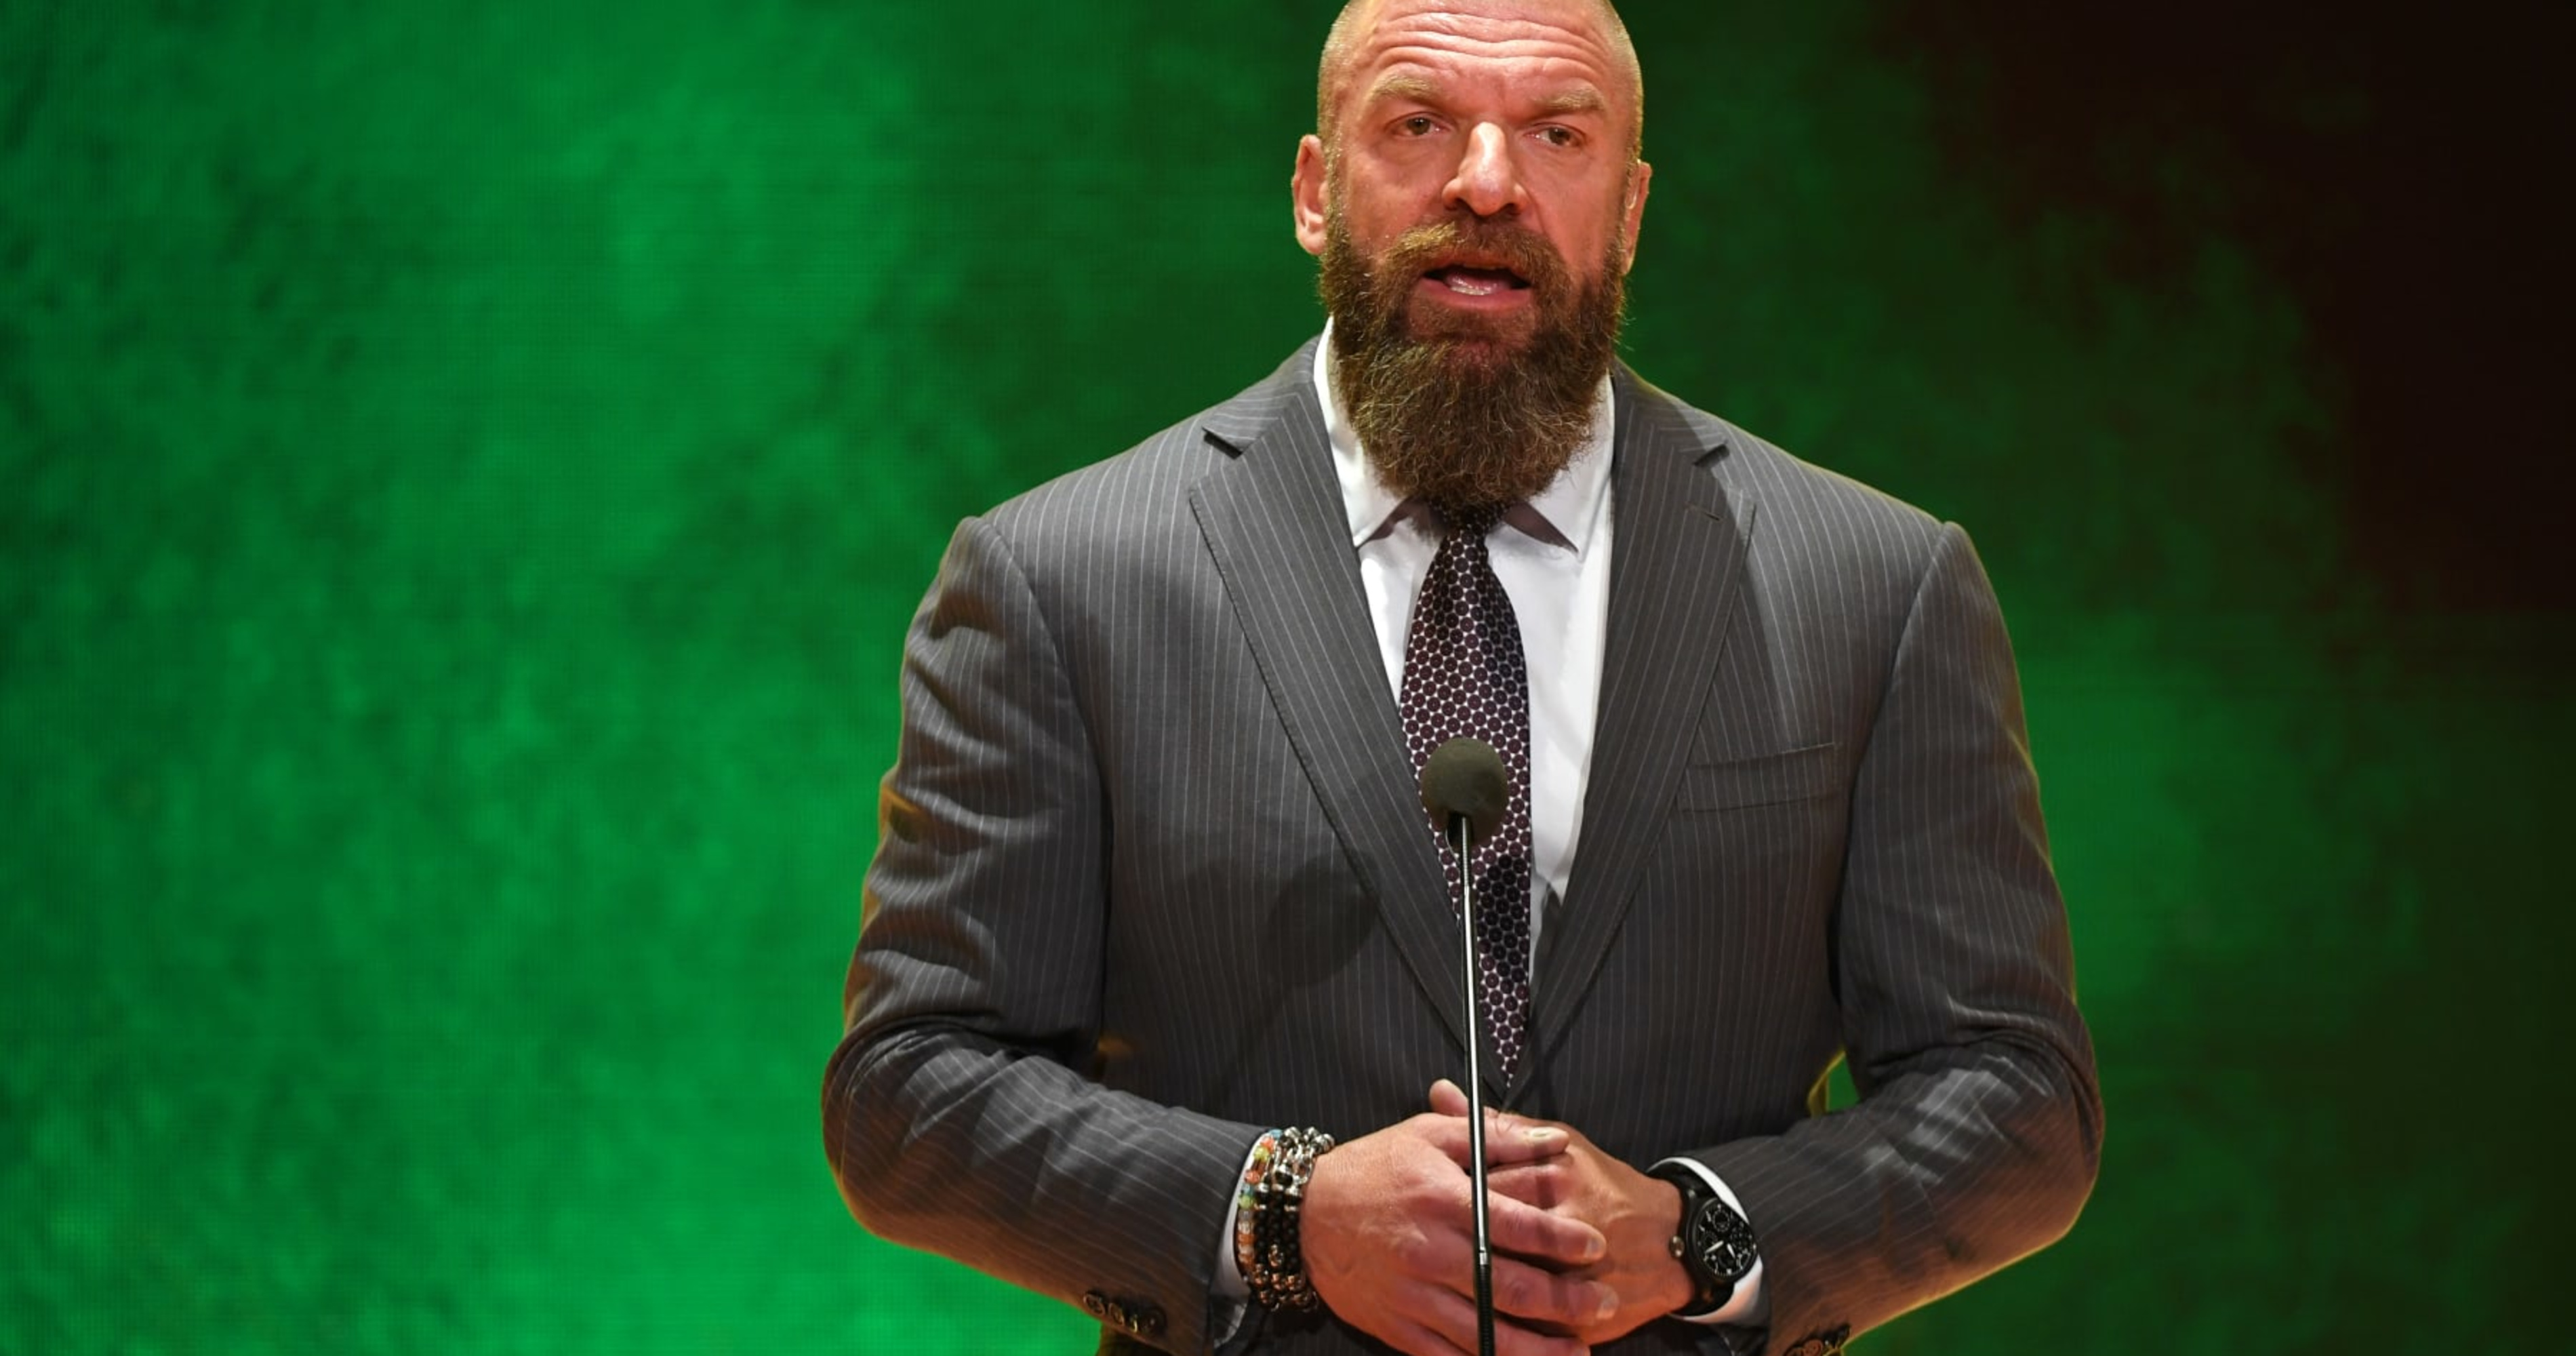 Www Hhh Sex - Triple H Returns to WWE as Executive VP of Talent After Heart Issues |  News, Scores, Highlights, Stats, and Rumors | Bleacher Report